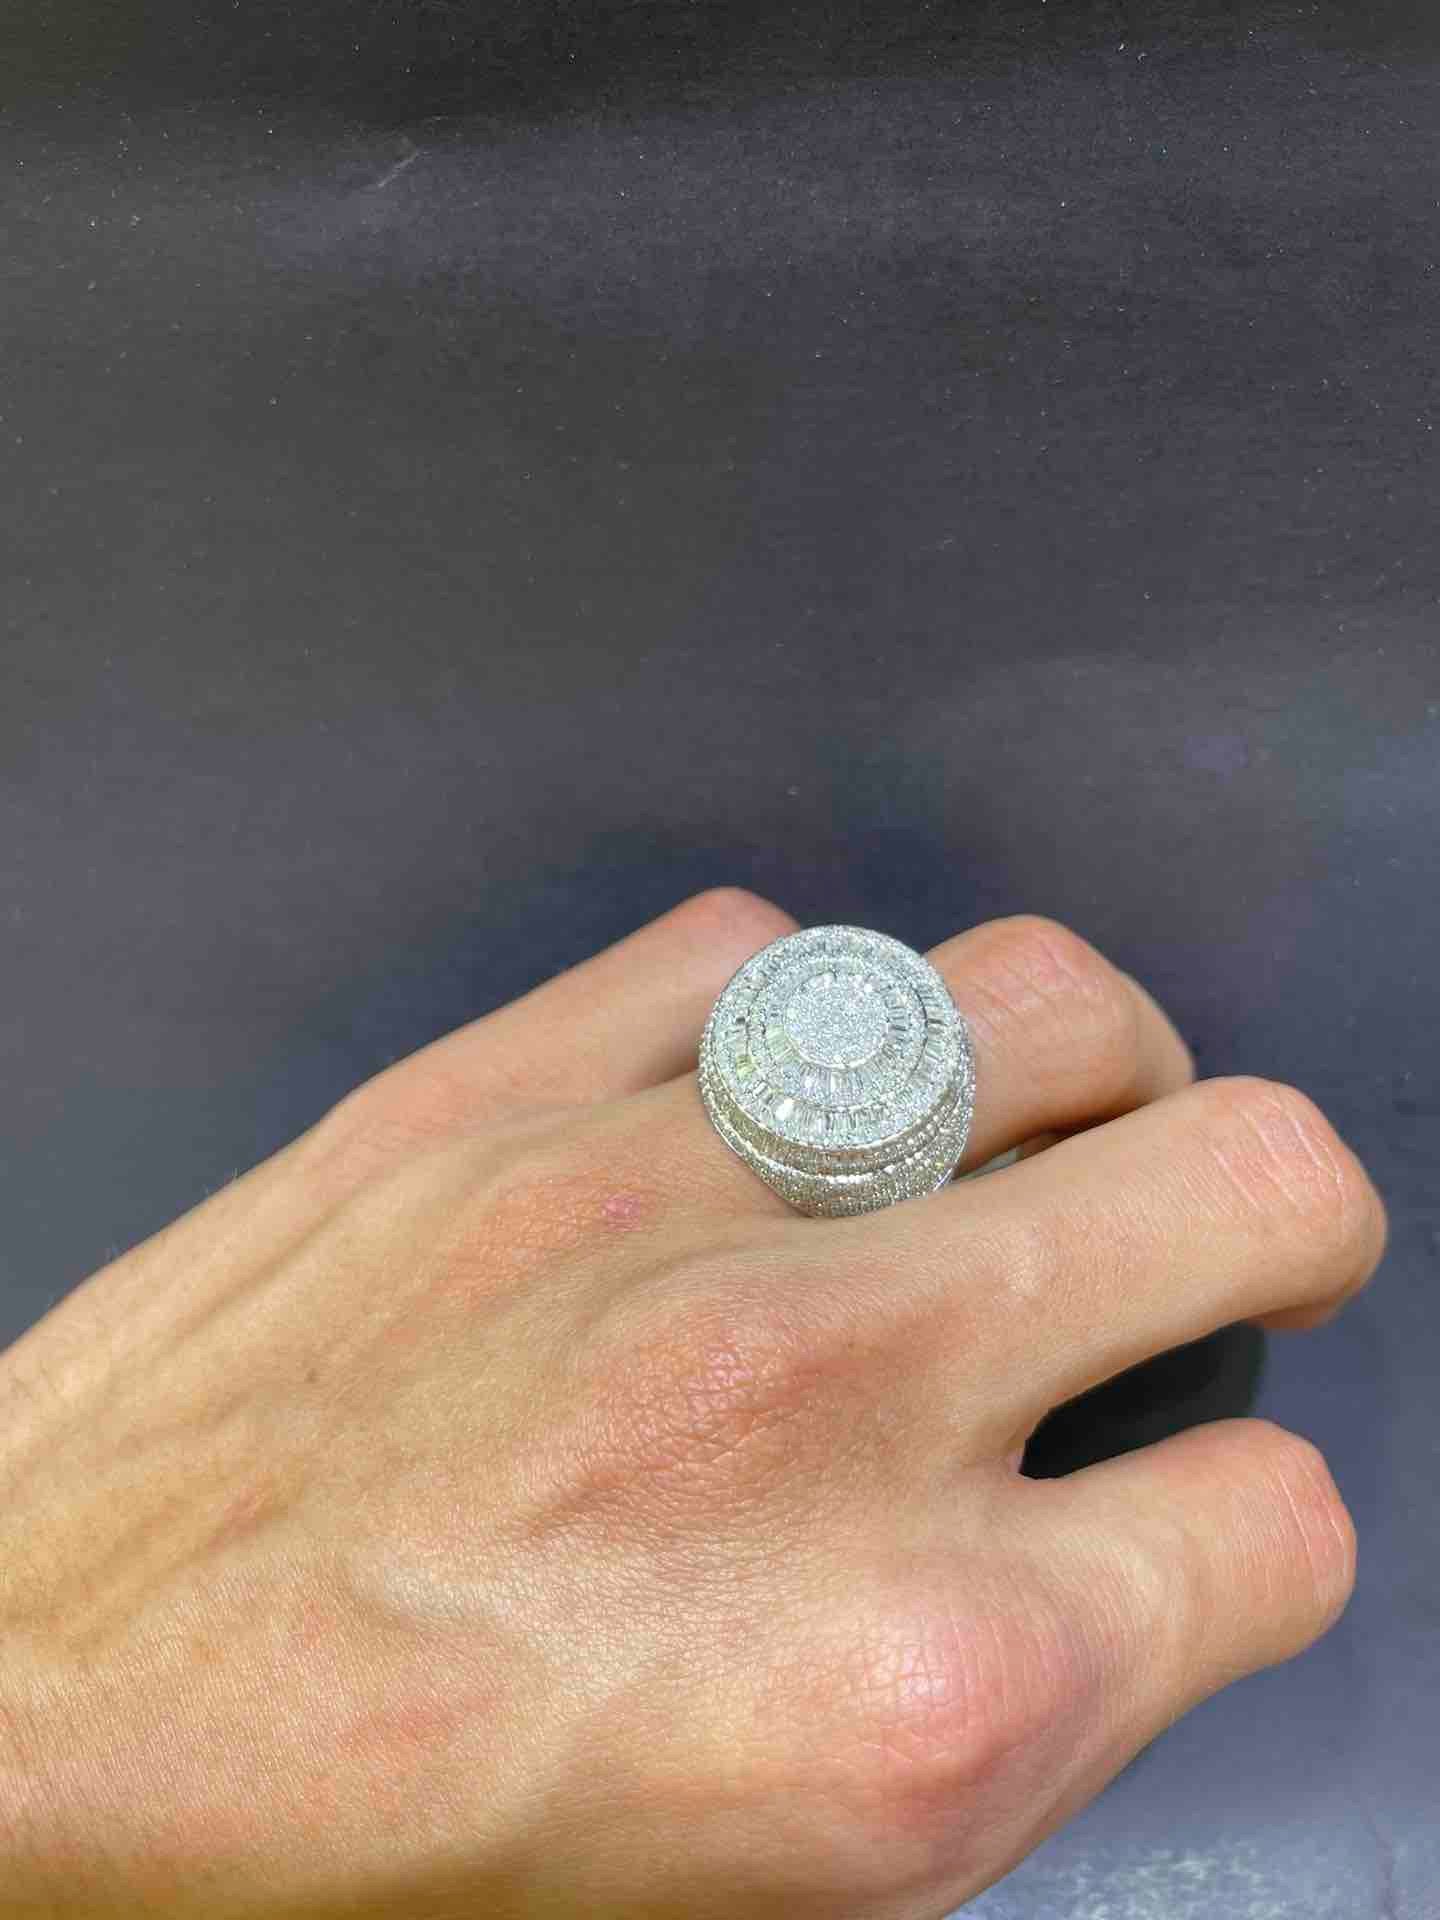 "14k White Gold Iced Out Championship Ring"